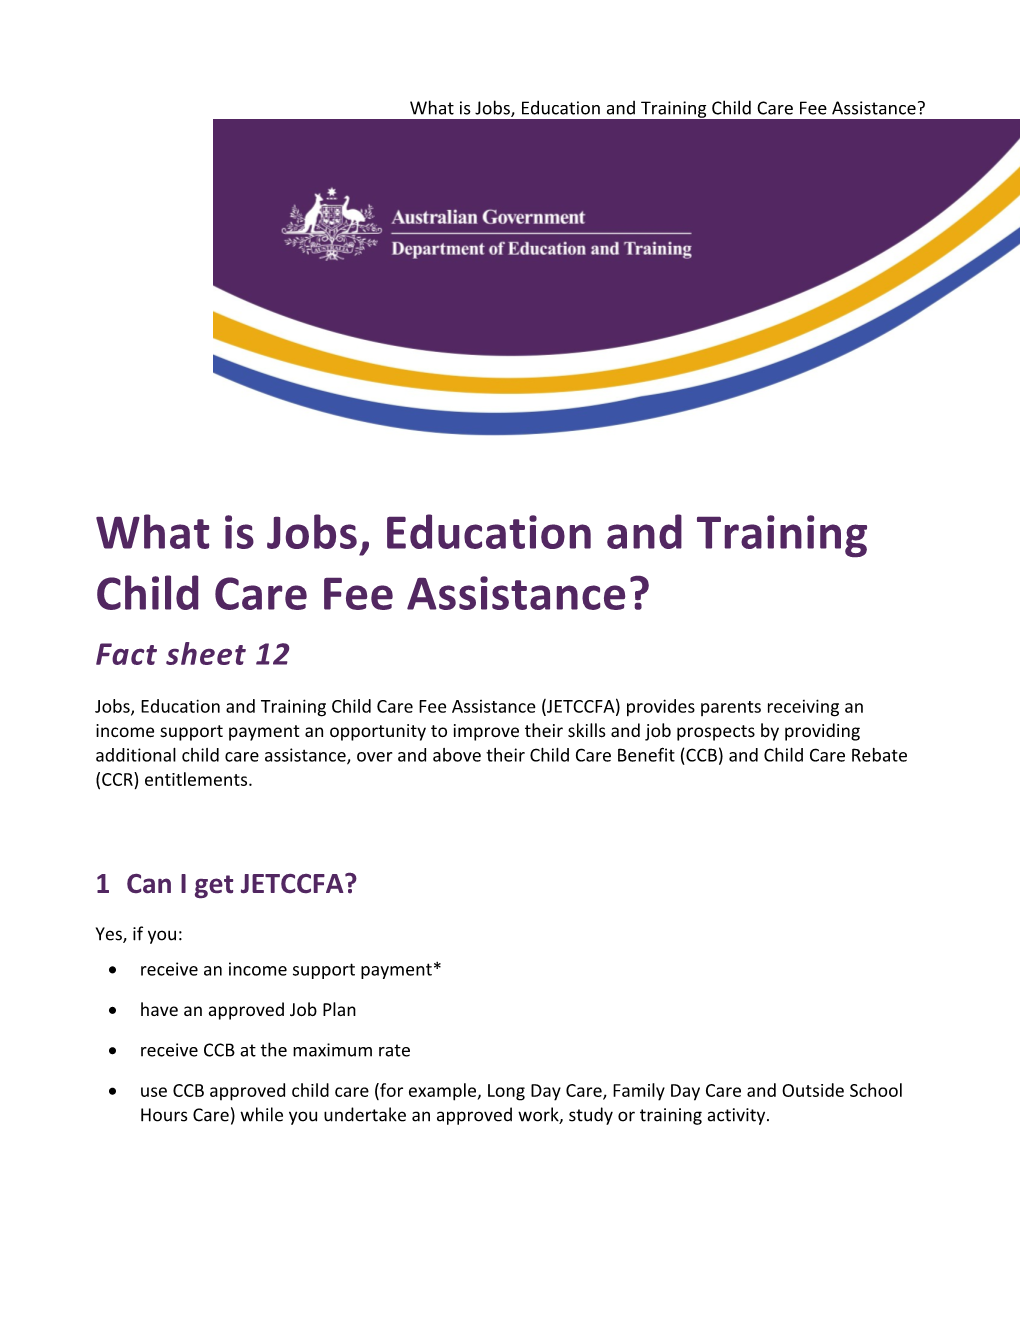 What Is Jobs, Education and Training Child Care Fee Assistance?